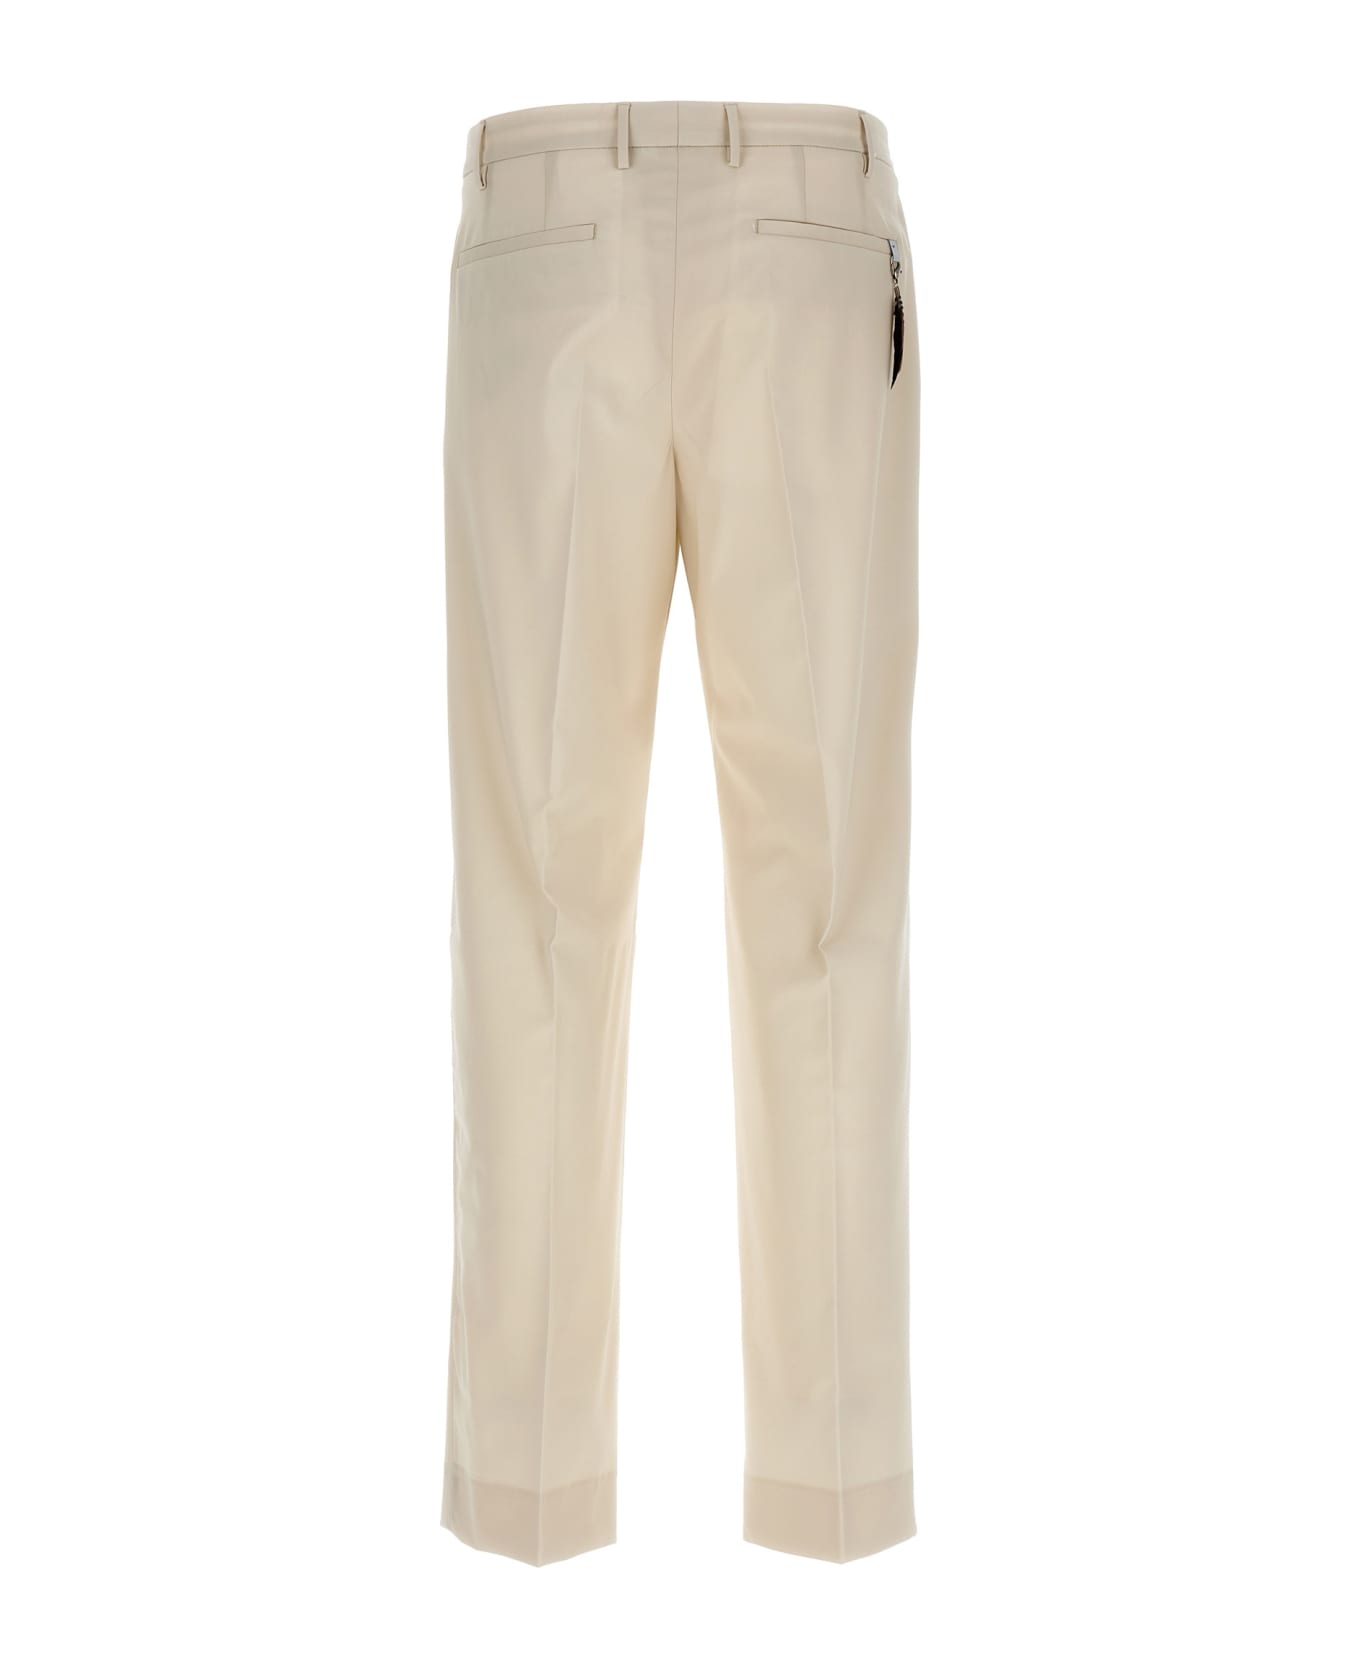 PT01 'diciannove' Pants - White